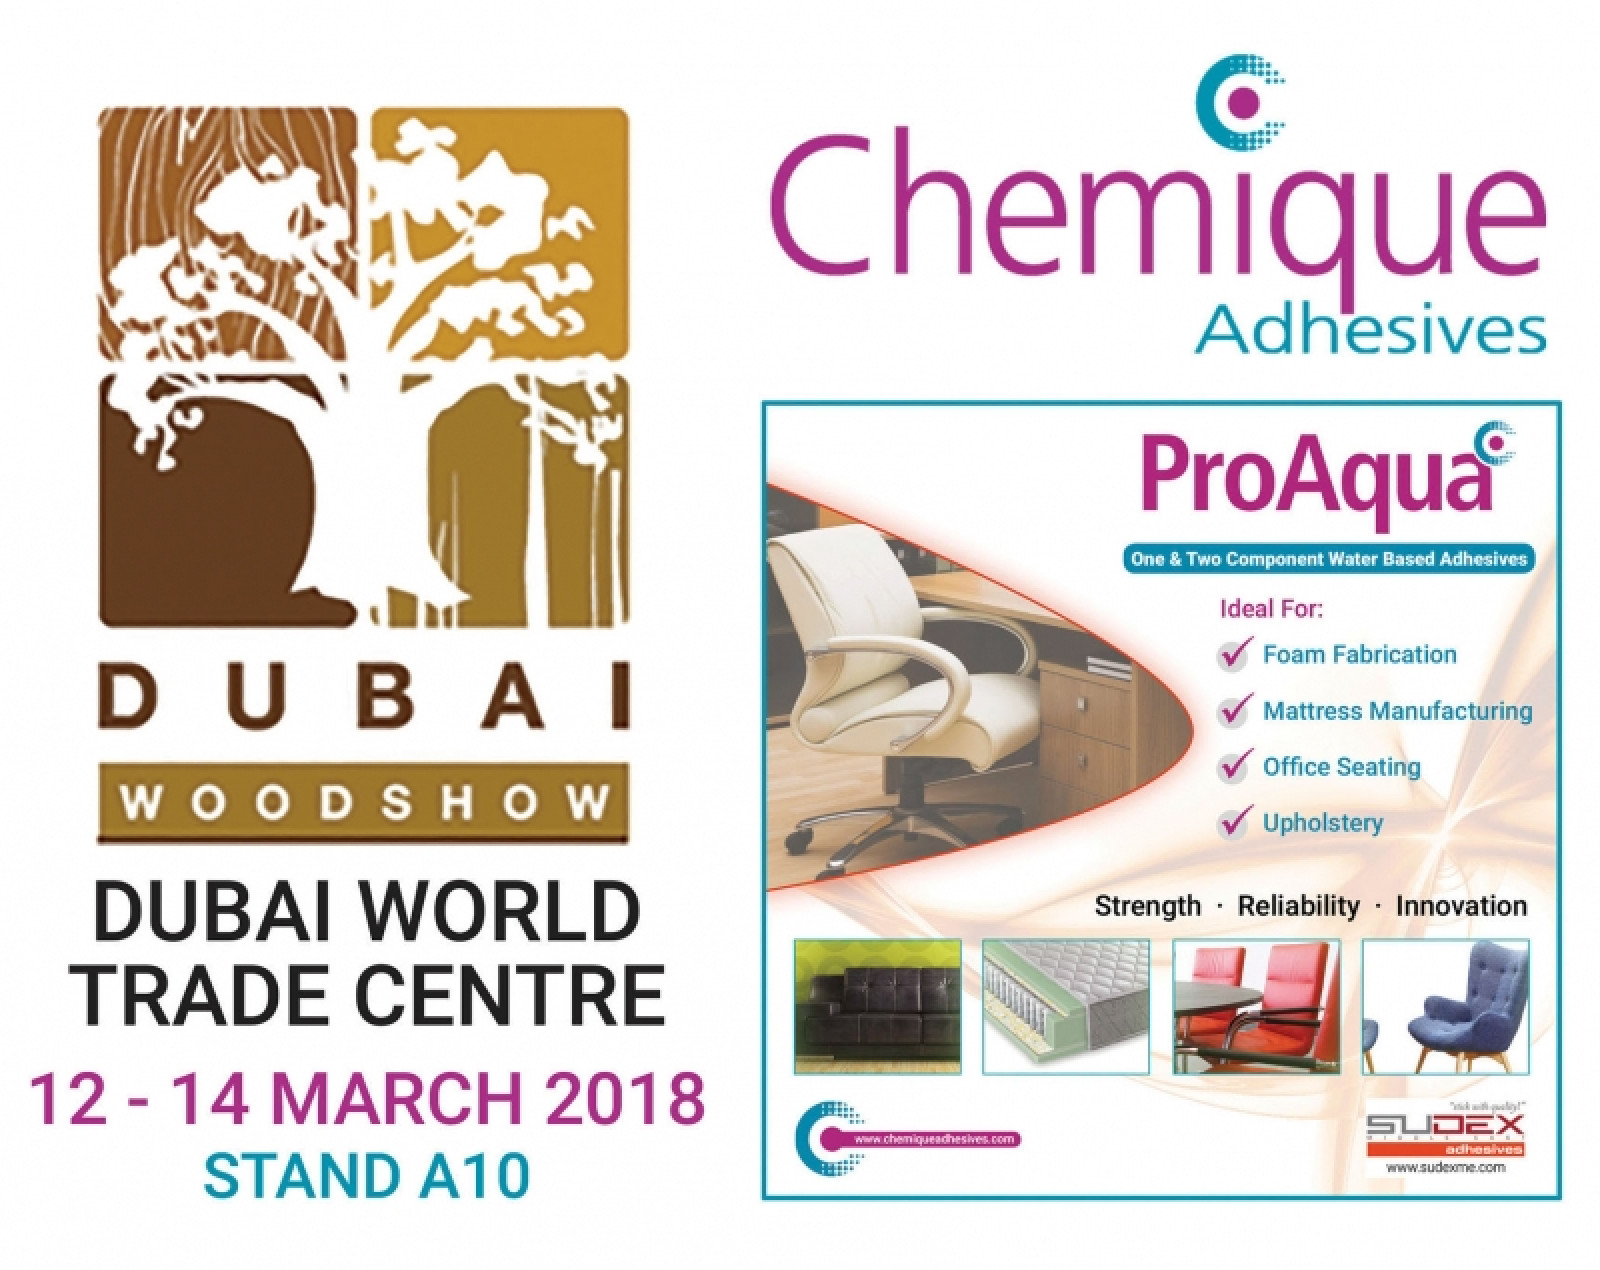 Chemique Adhesives has solutions for all at Dubai...